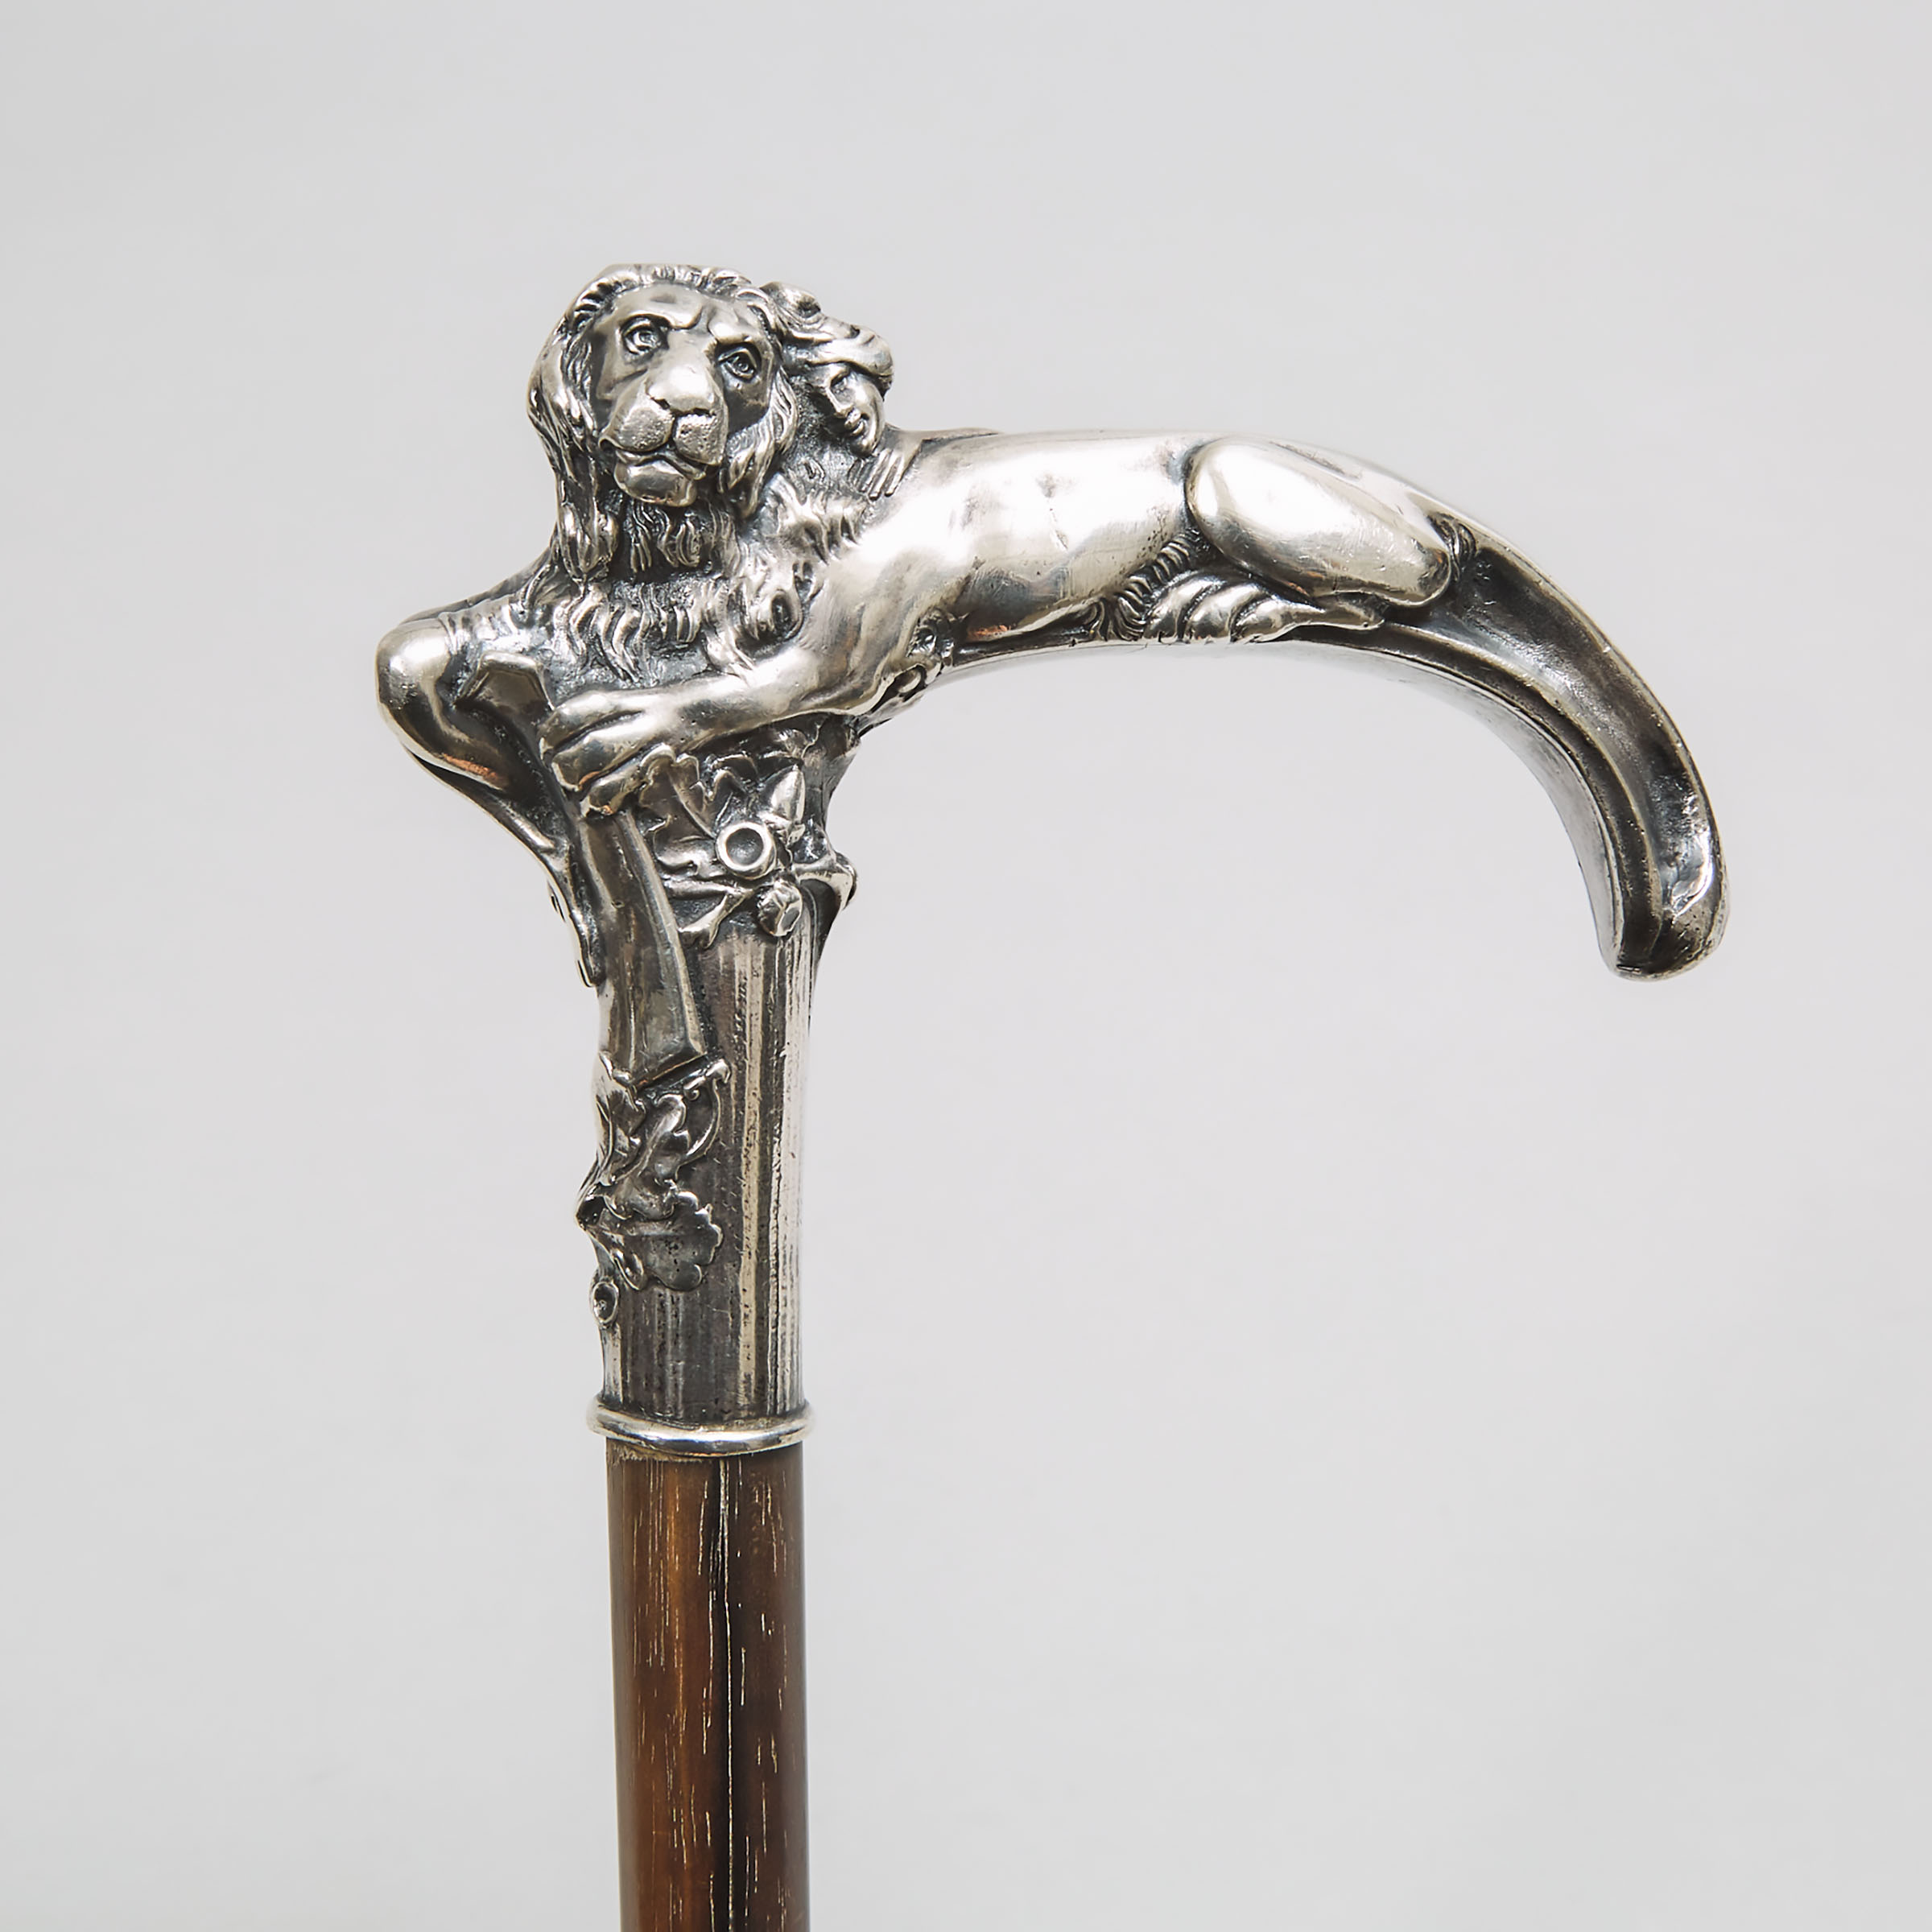 Russian Silver Handled Cane, Moscow, 1908-26